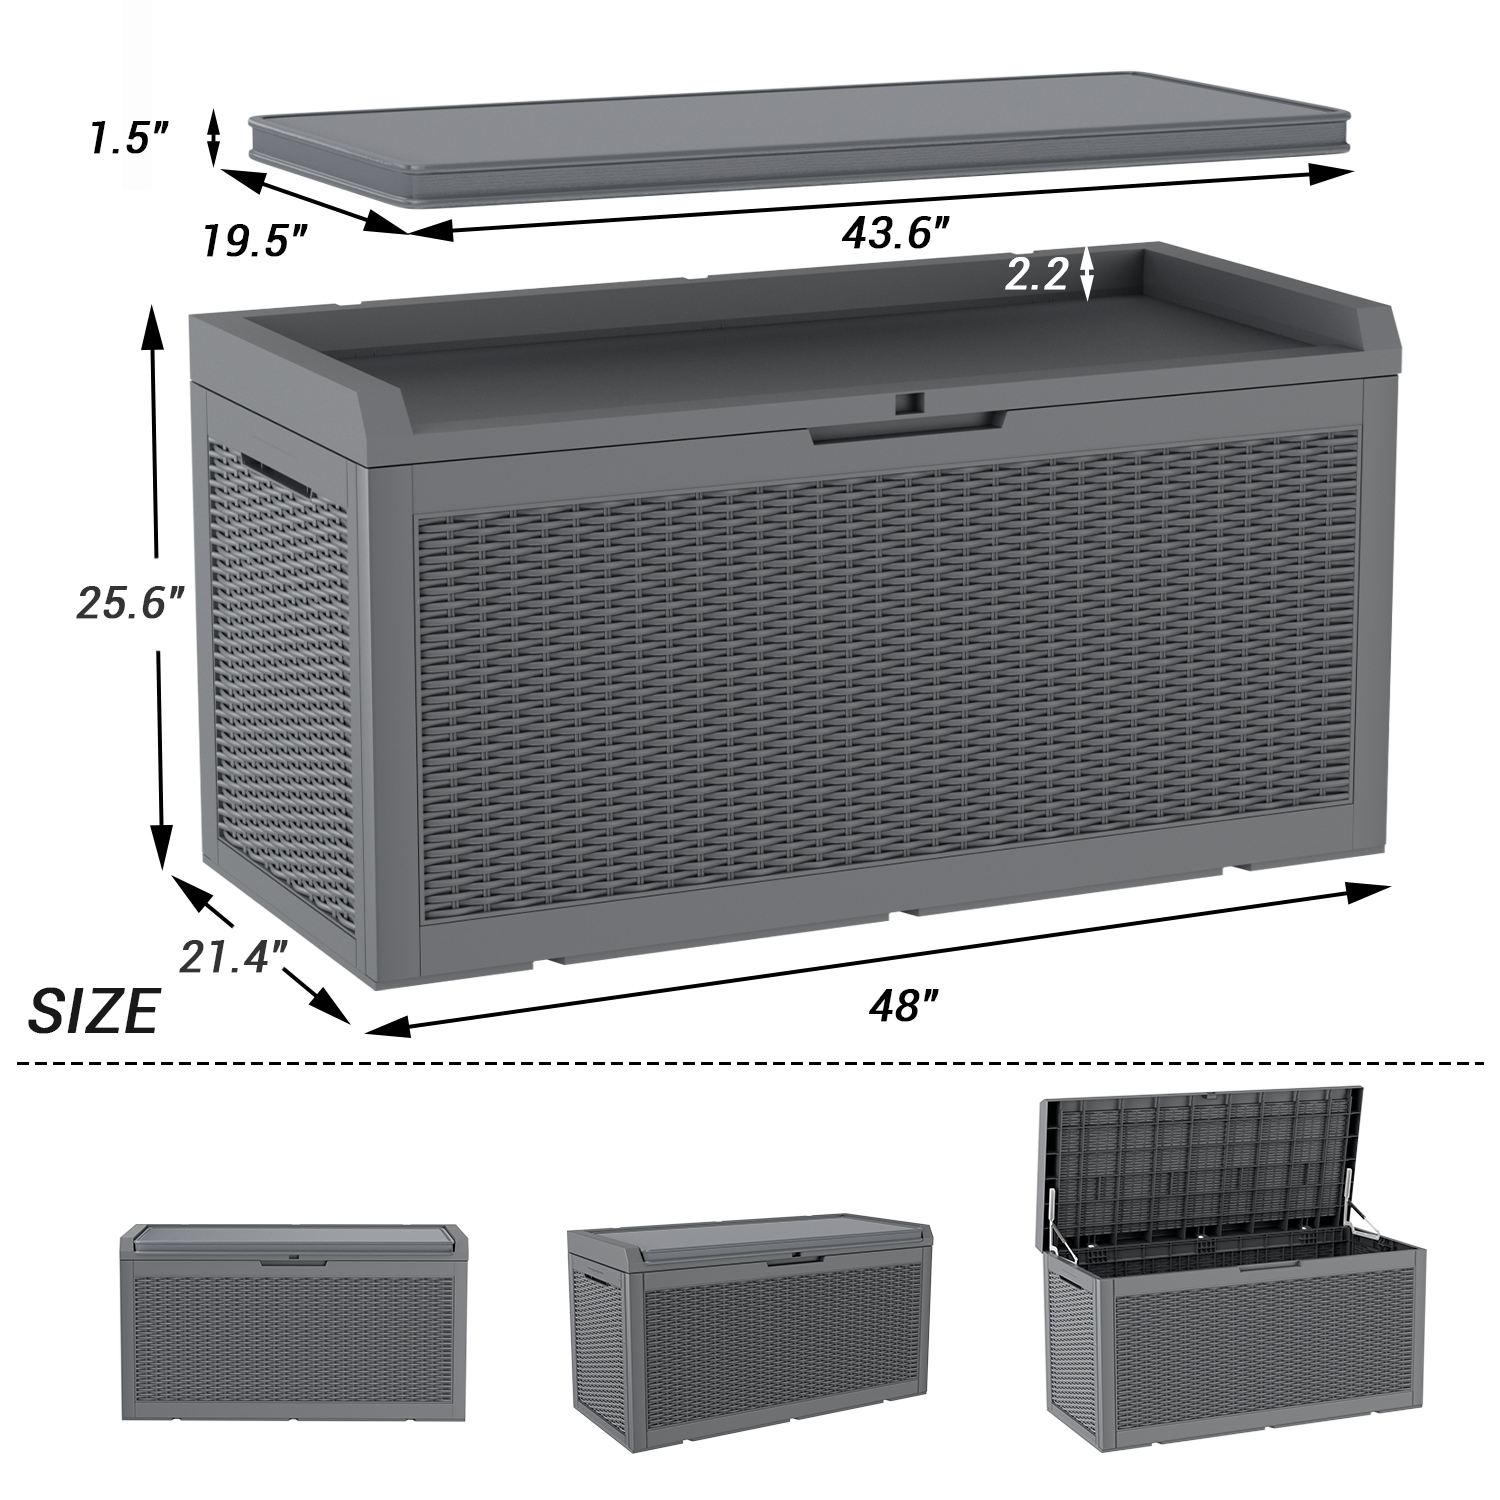 Vineego 48-in L x 21.4-in 100- Gallons Gray Plastic Deck Box in